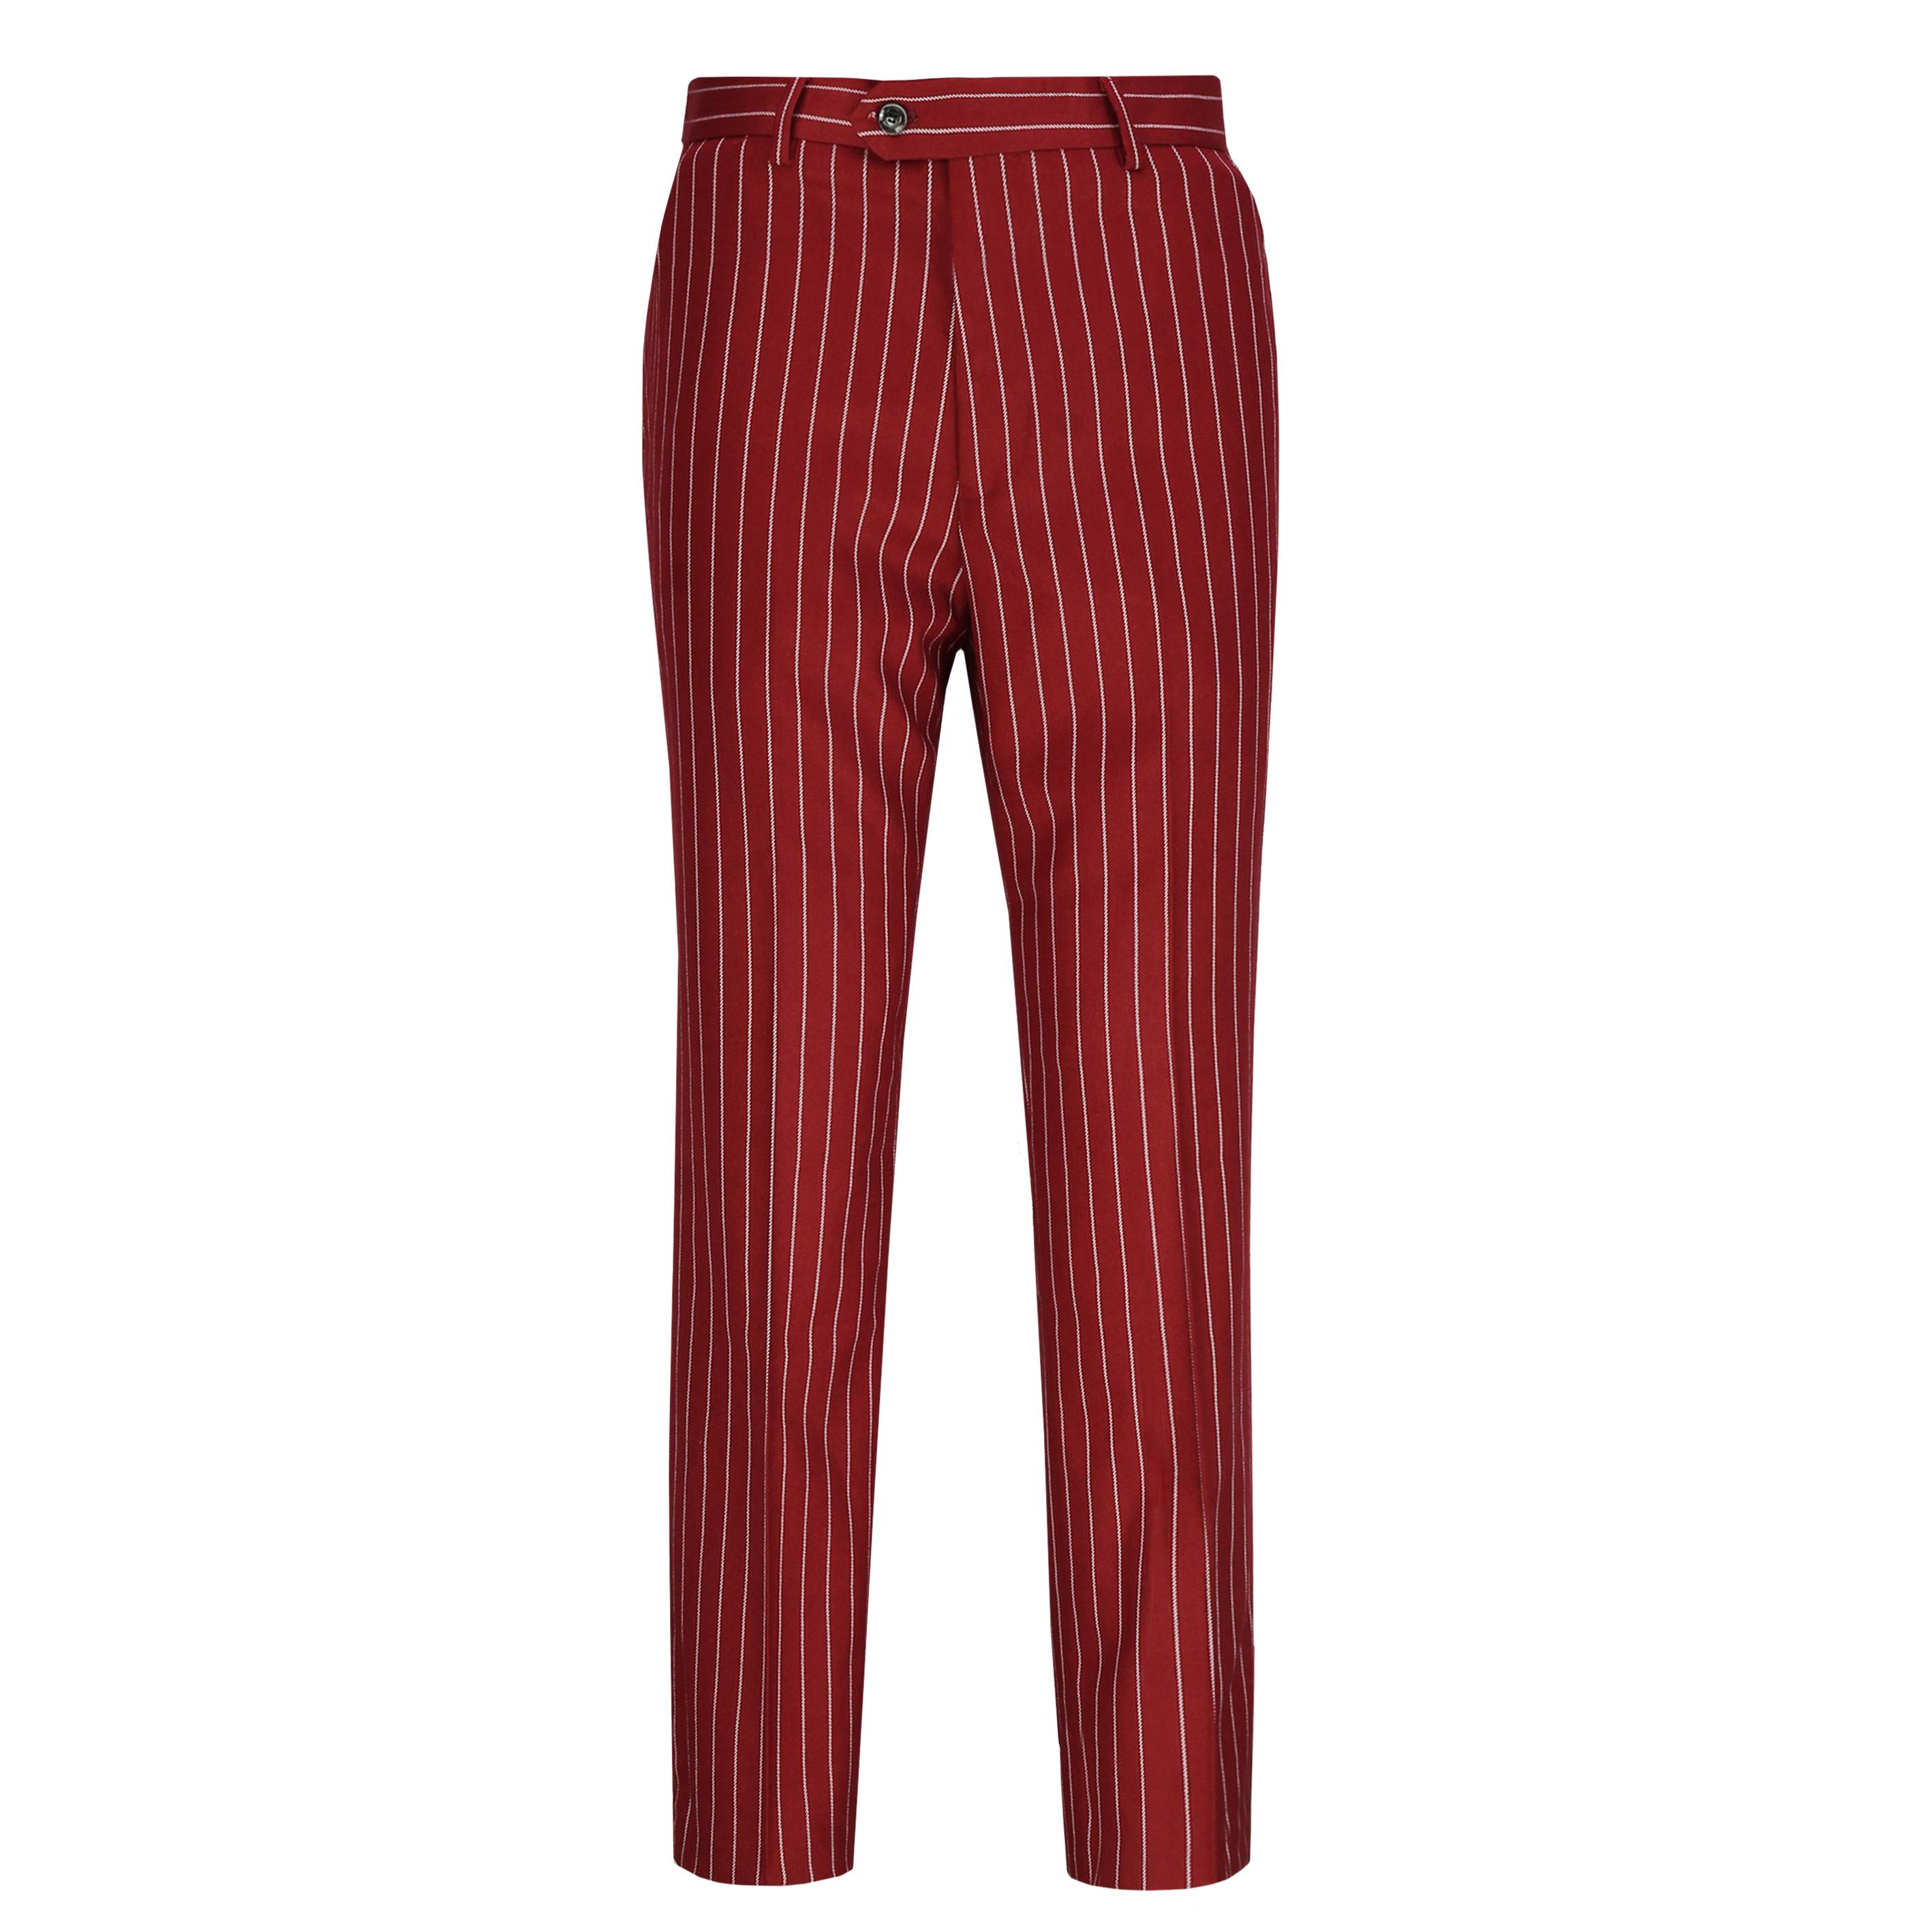 Mens Classic Tweed Pinstripe Trousers Retro Vintage Tailored Fit Suit Dress  Pant